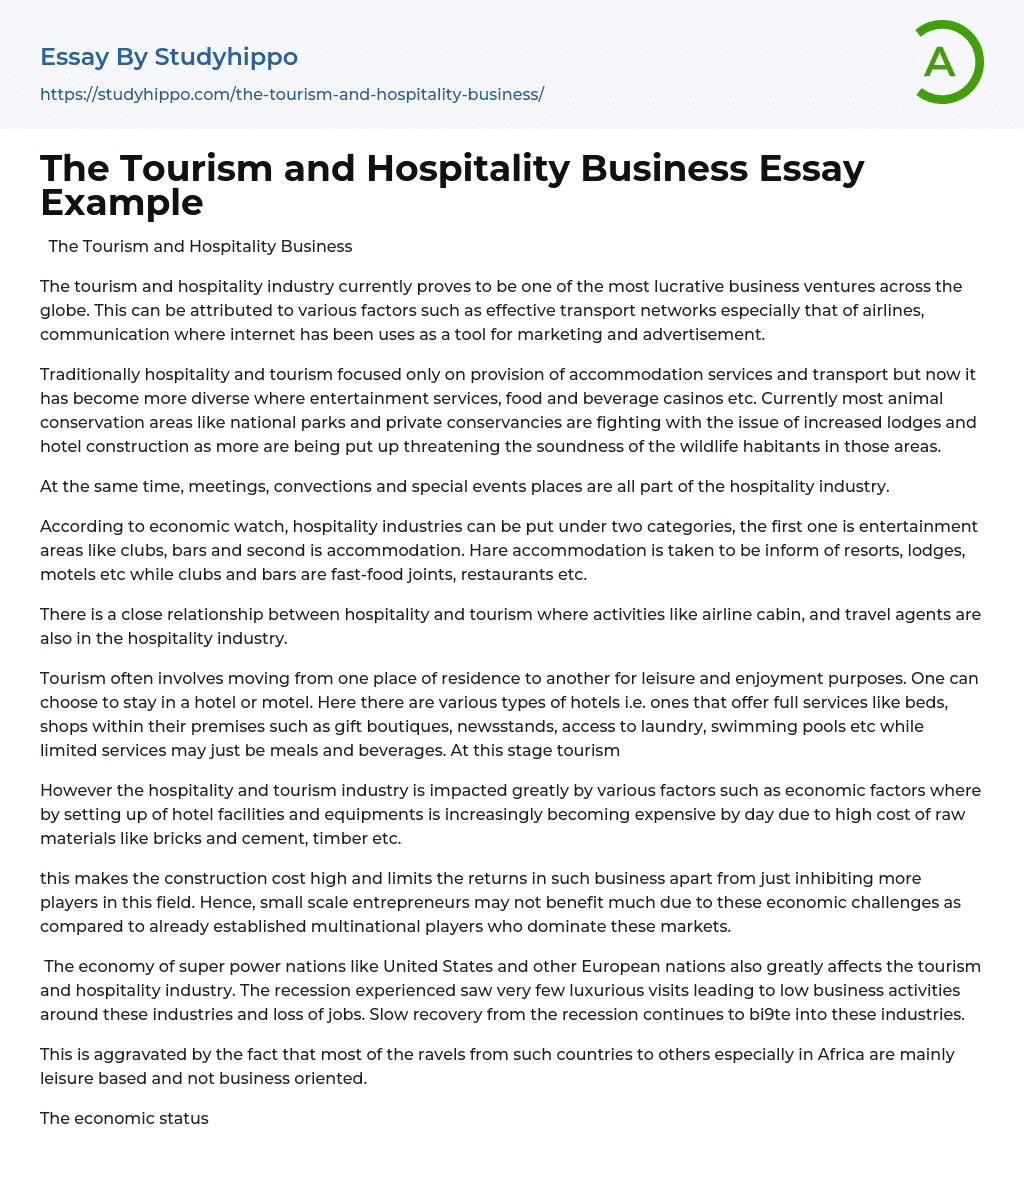 The Tourism and Hospitality Business Essay Example